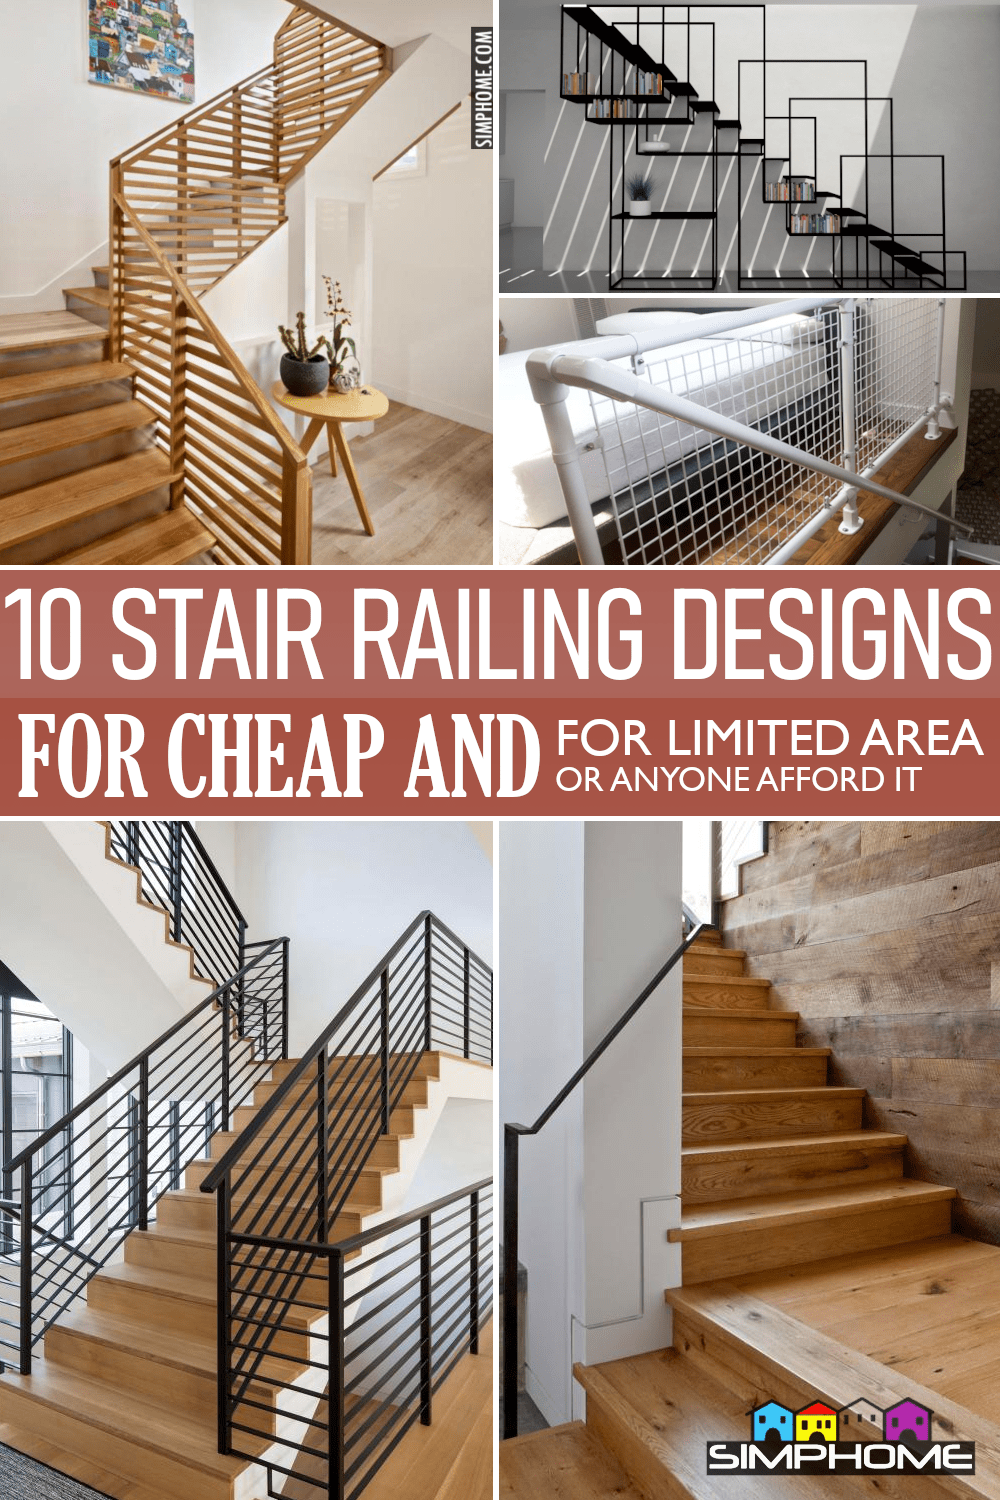 10 Stair Railing Ideas via Simphome.comFeatured